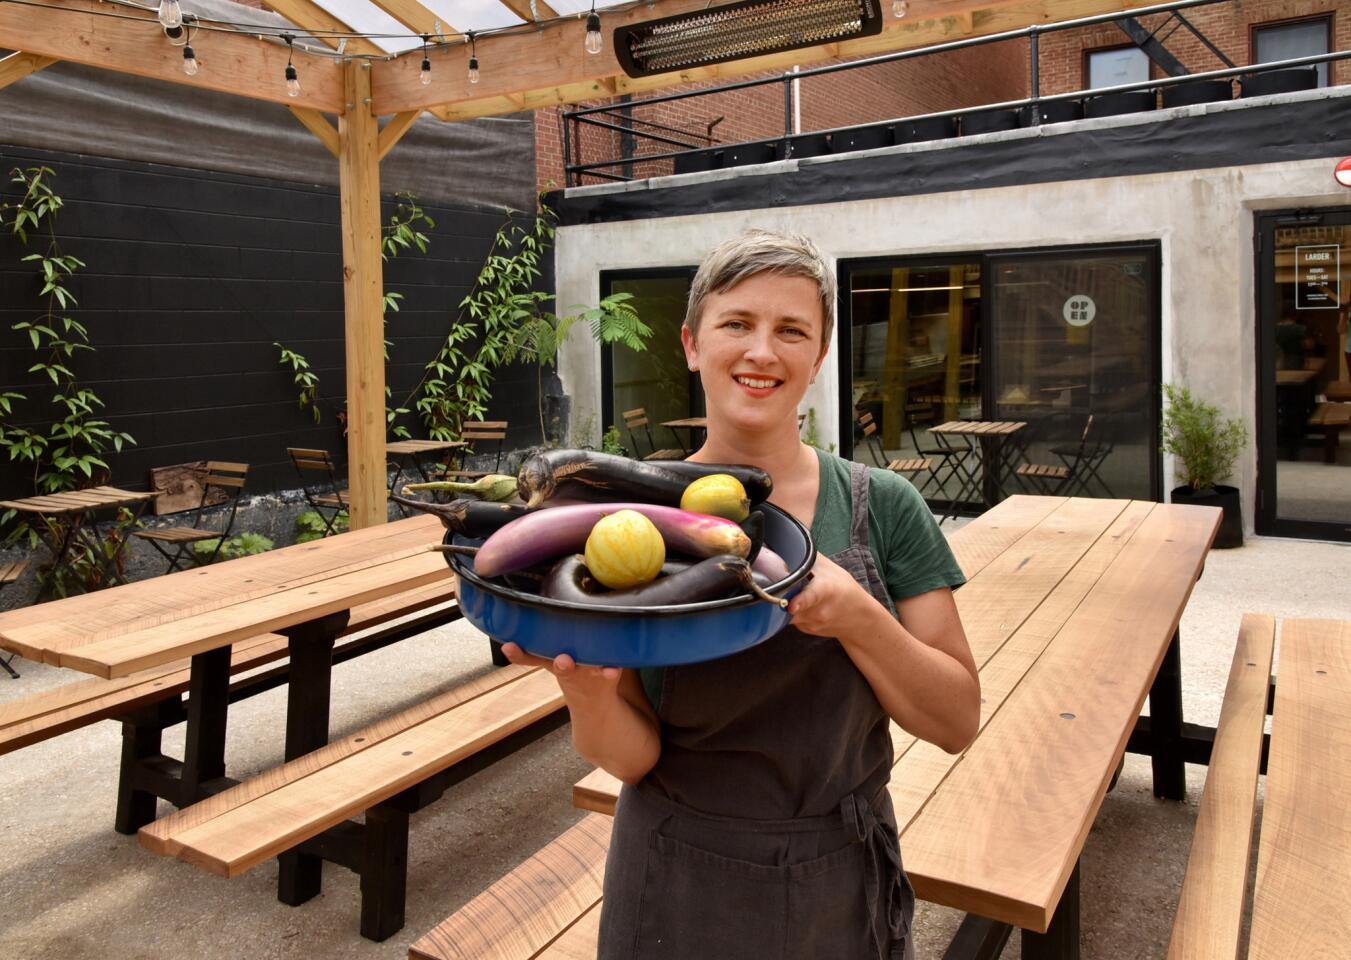 Chef-owner Helena del Pesco, holding a bounty of local vegetables, in the covered dining patio at Larder Baltimore, a farm-to-table restaurant.